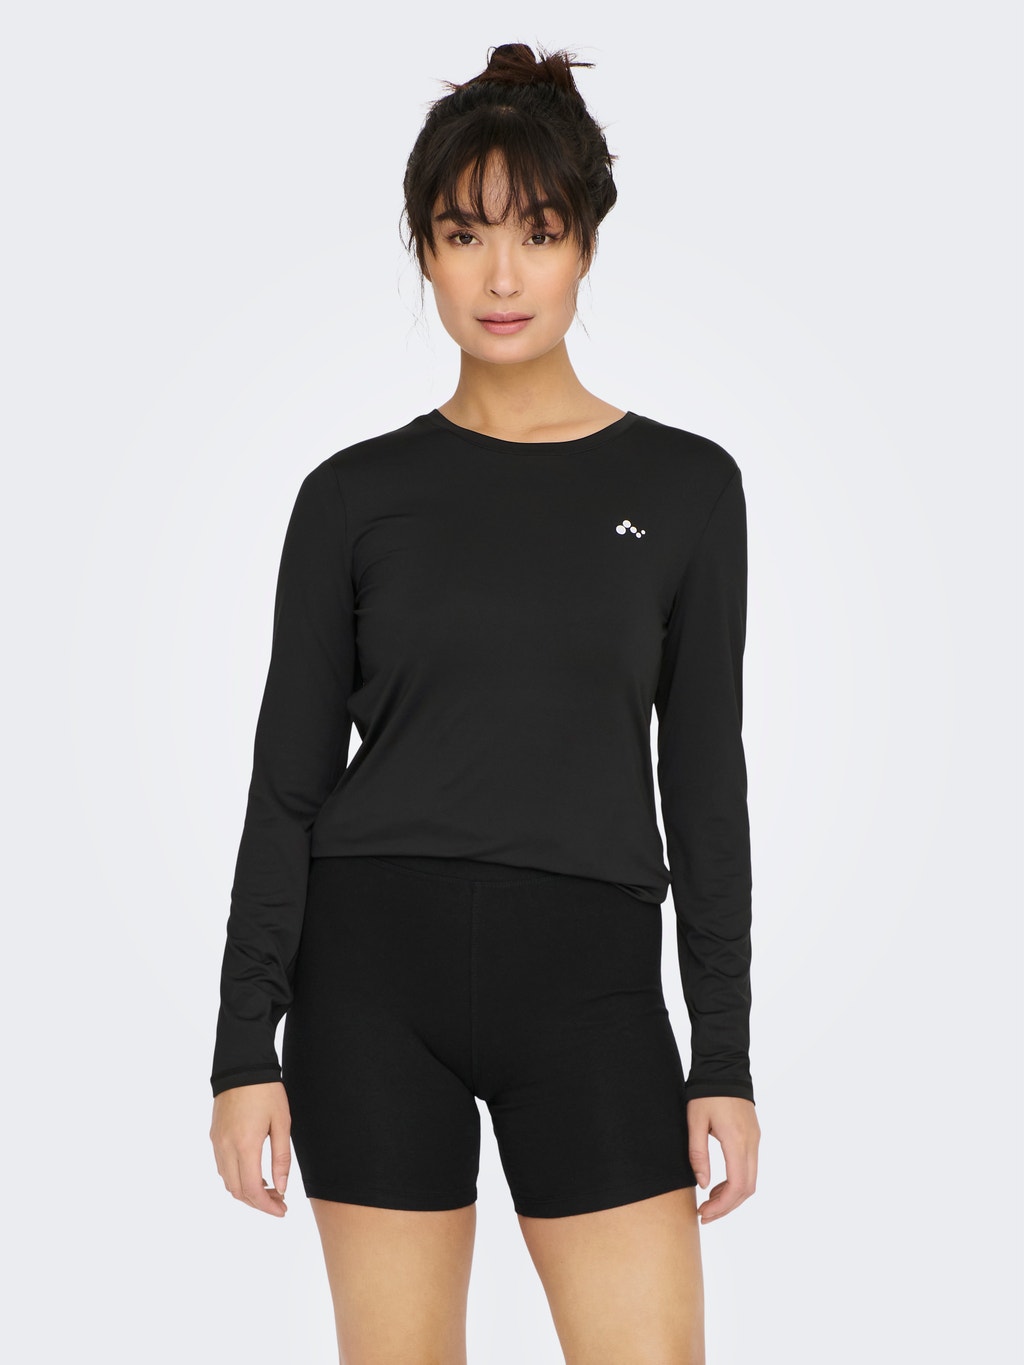 Training top with long sleeves | Black | ONLY®